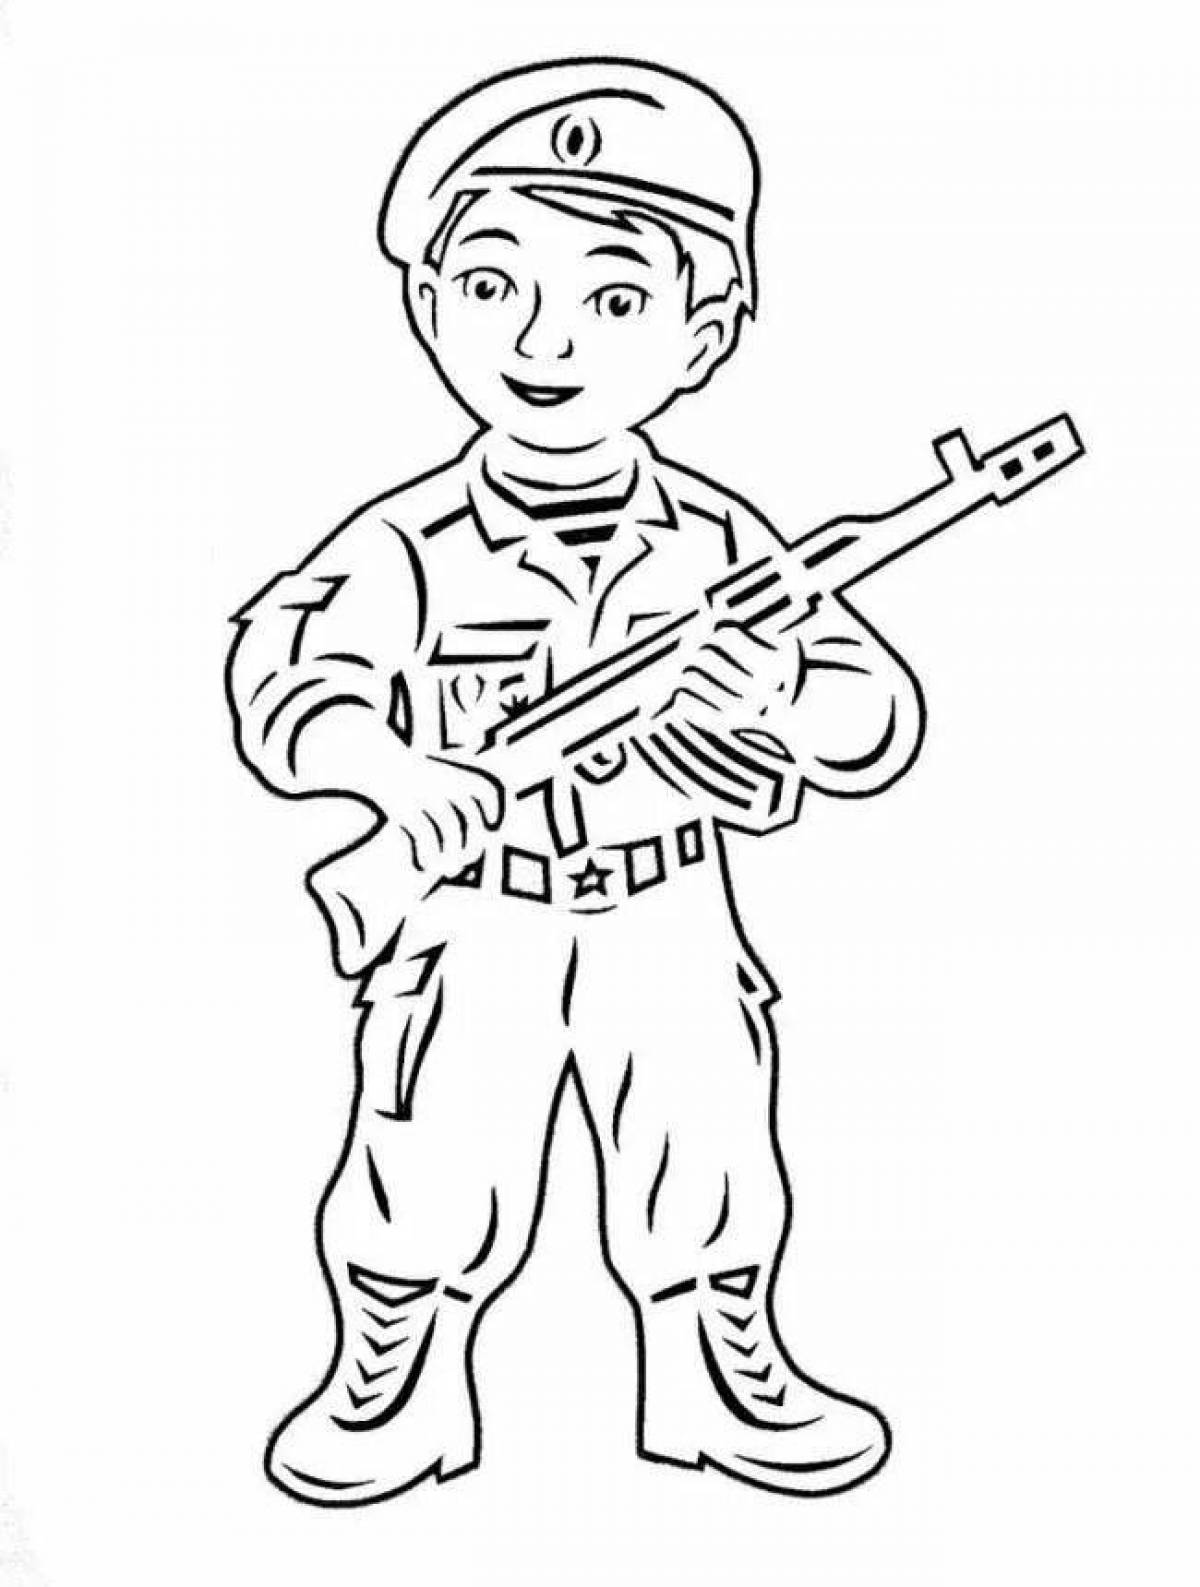 Amazing Soldier coloring page February 23